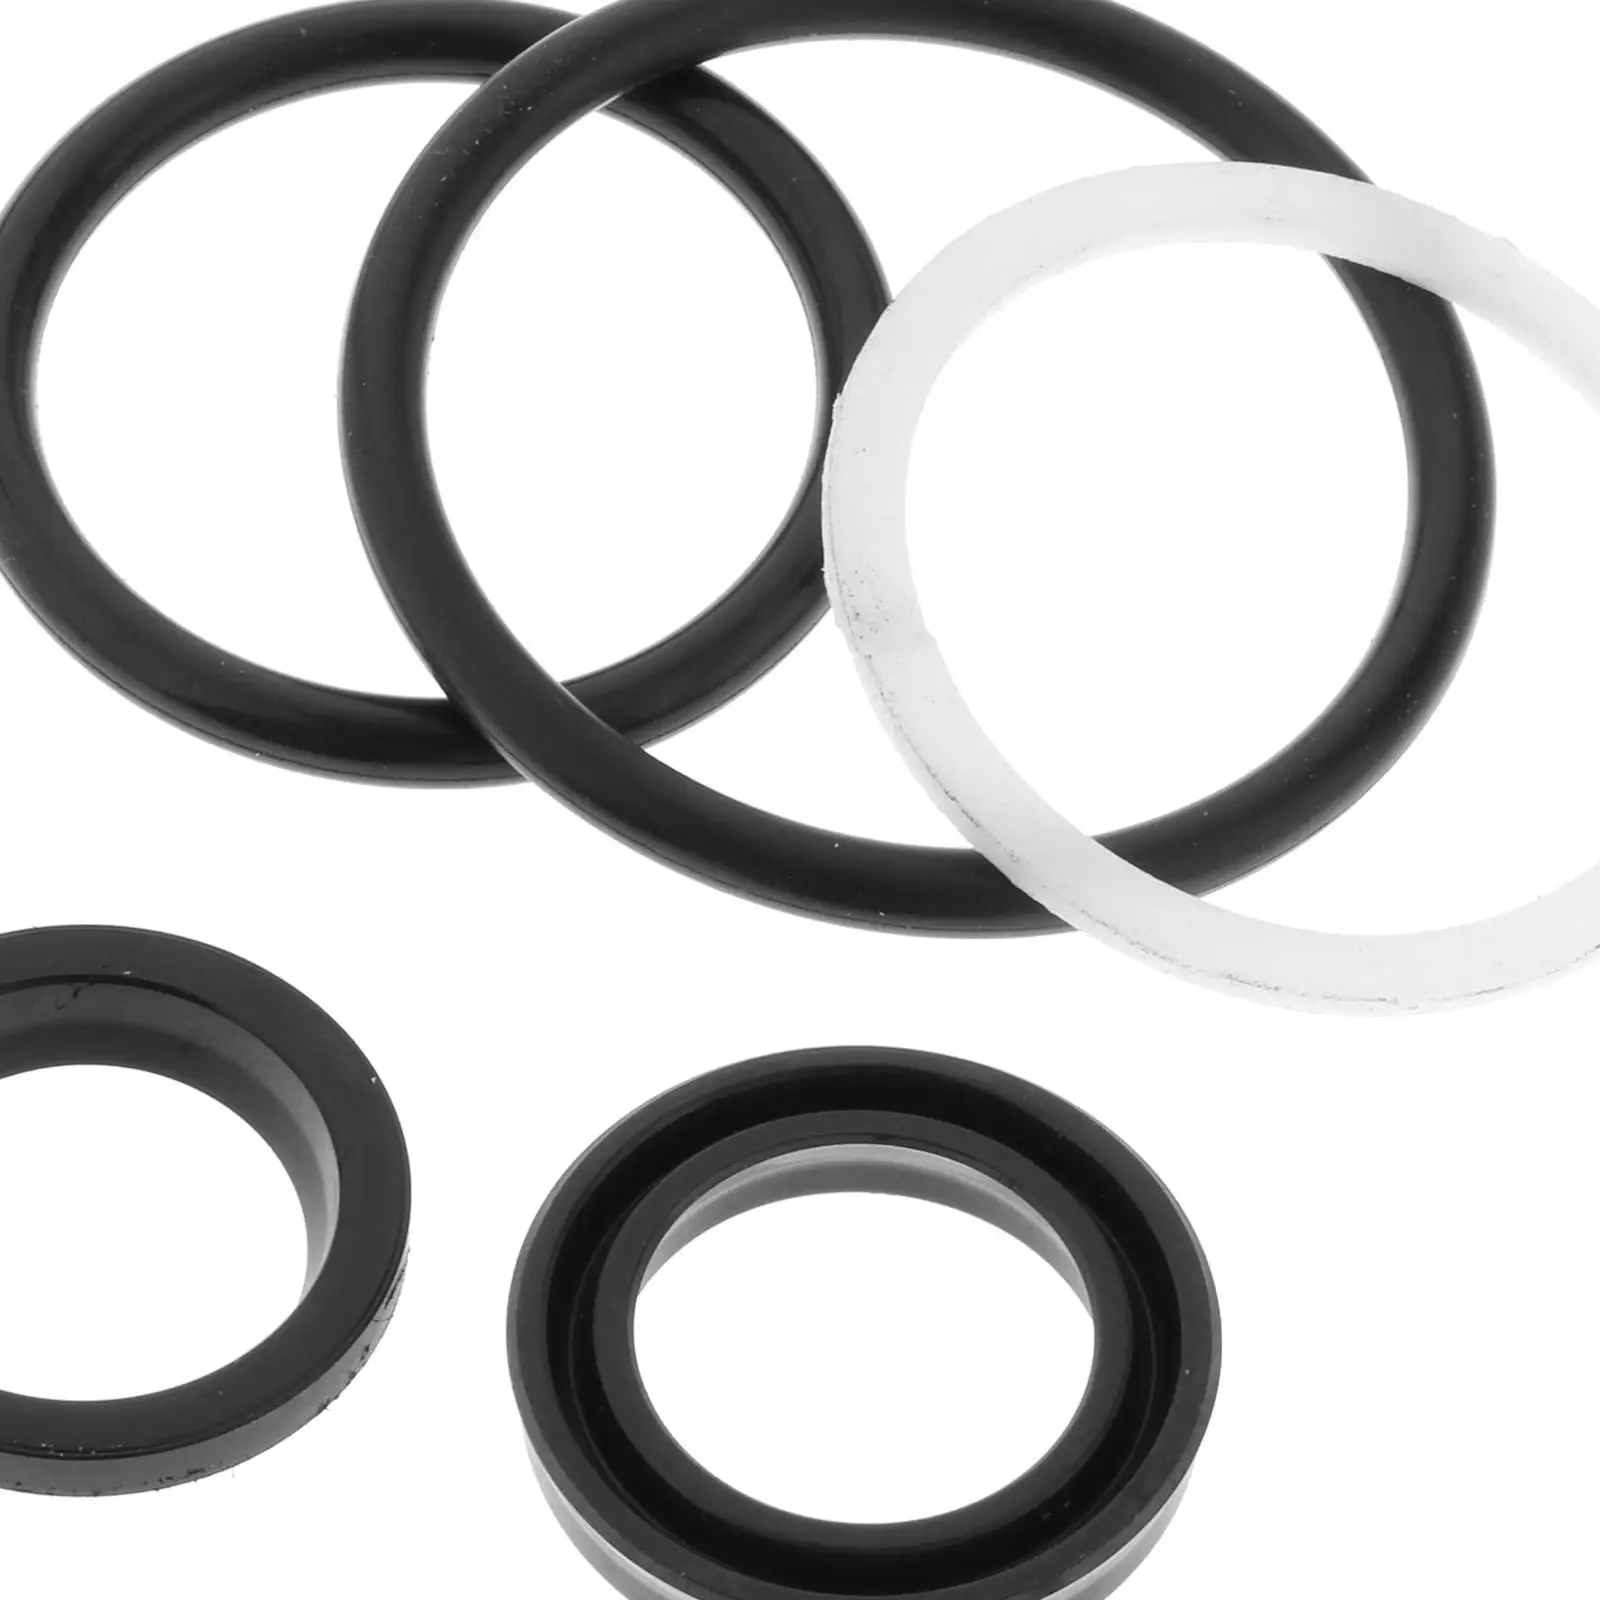 Kit 6E5-43874-01 Fit for  Outboard Parts